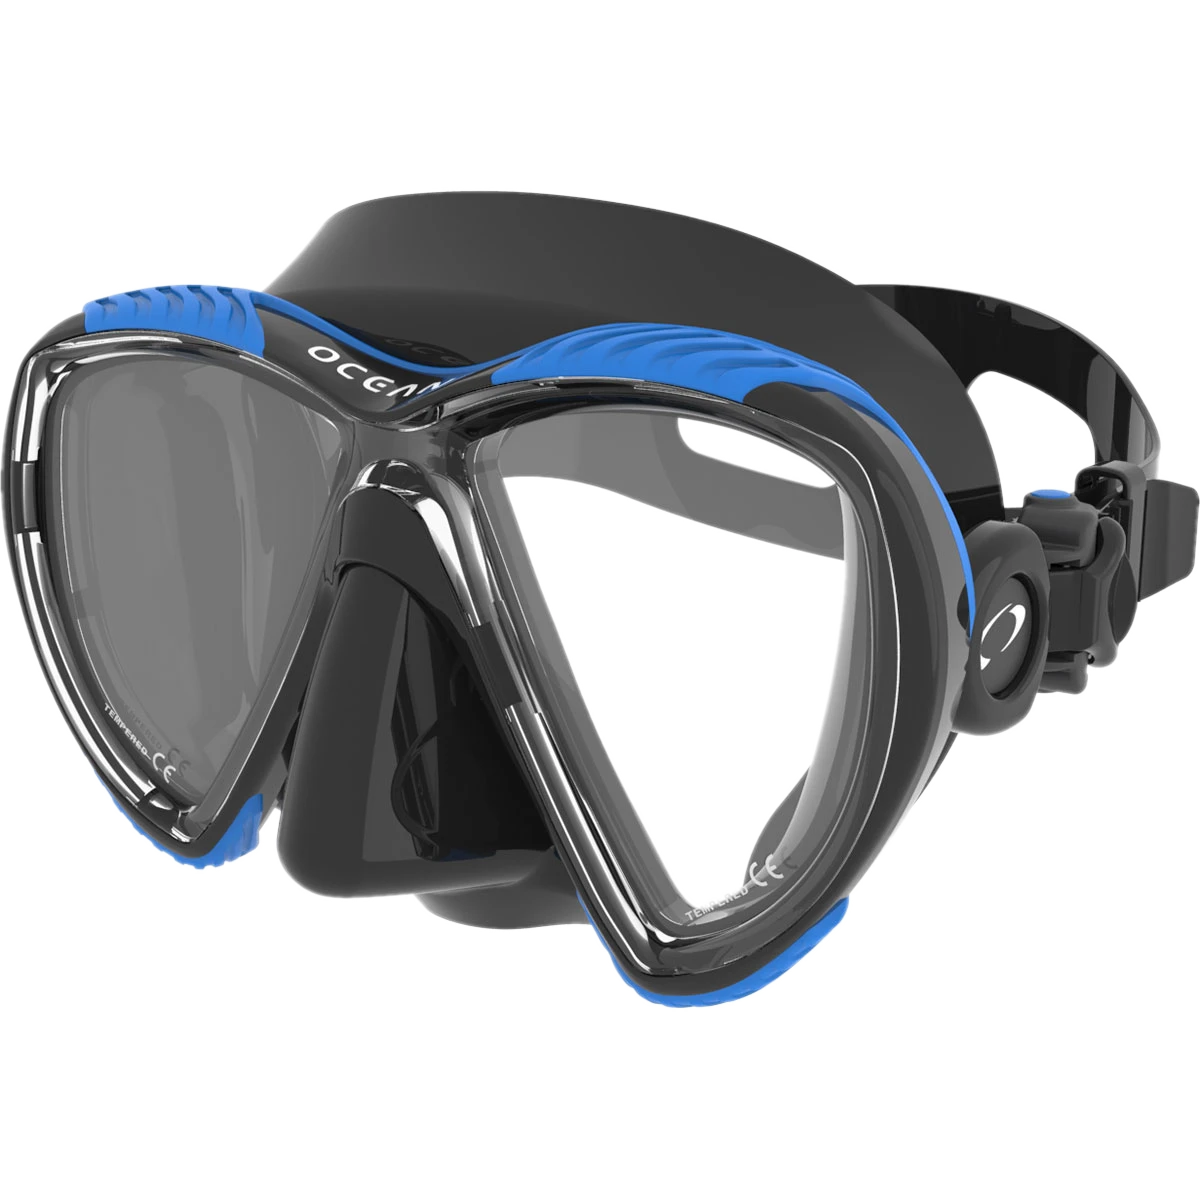 Oceanic Discovery Mask Black and Blue